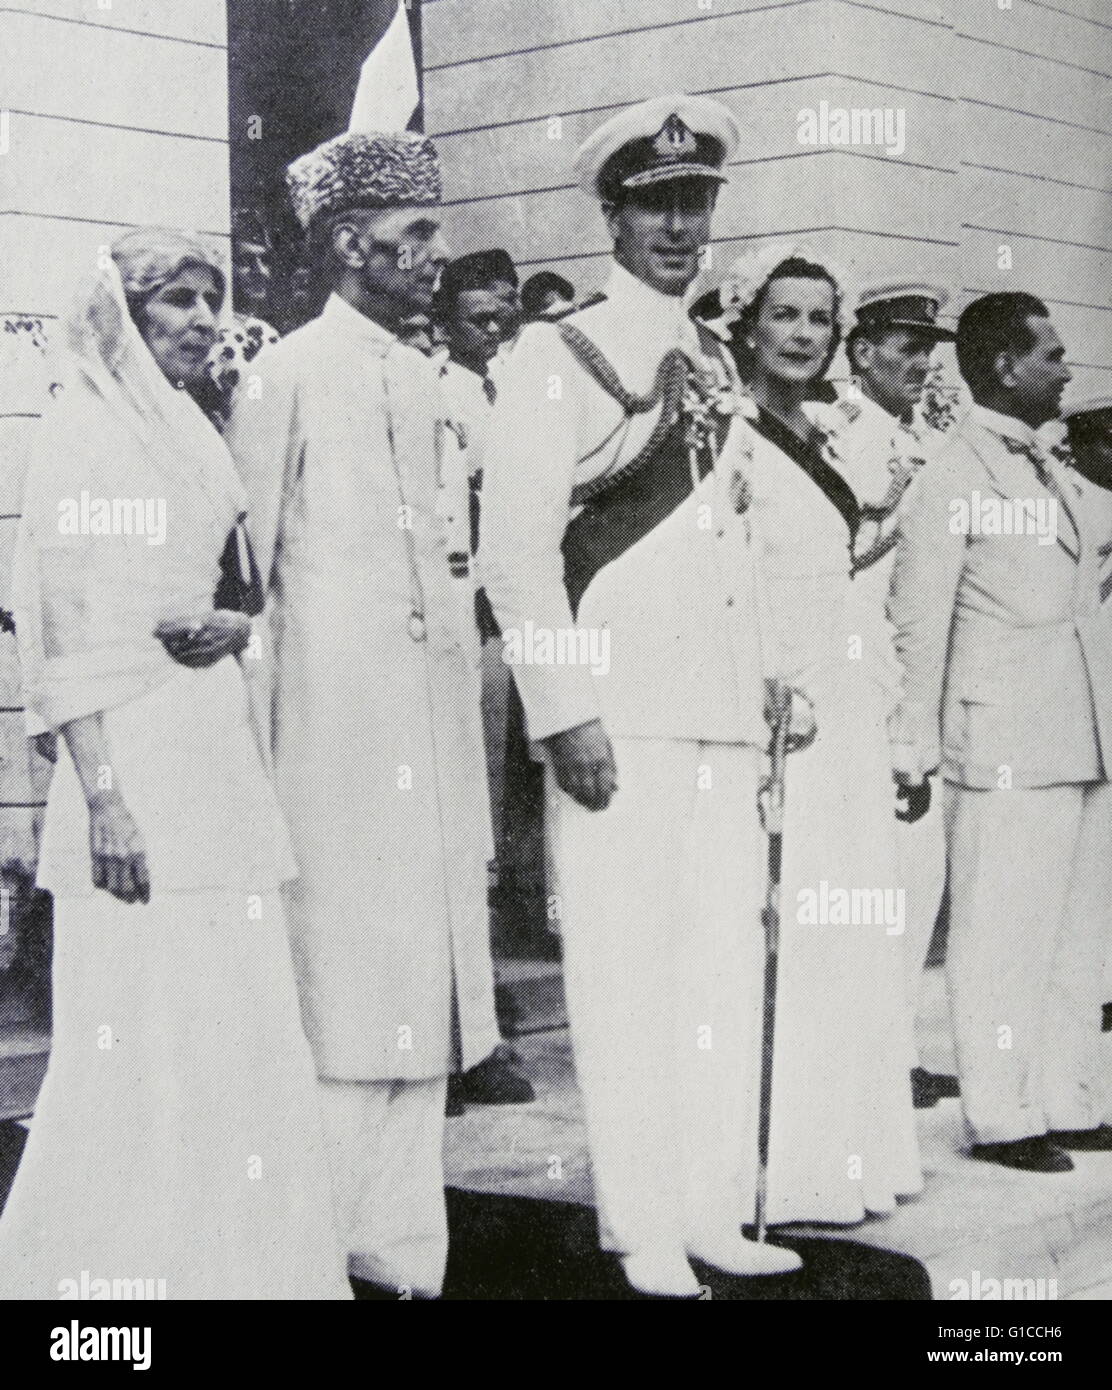 Lord Mountbatten (Viceroy of India) with Mohammed Ali Jinnah and Fatima Jinnah at Pakistan's independence in 1947 Stock Photo